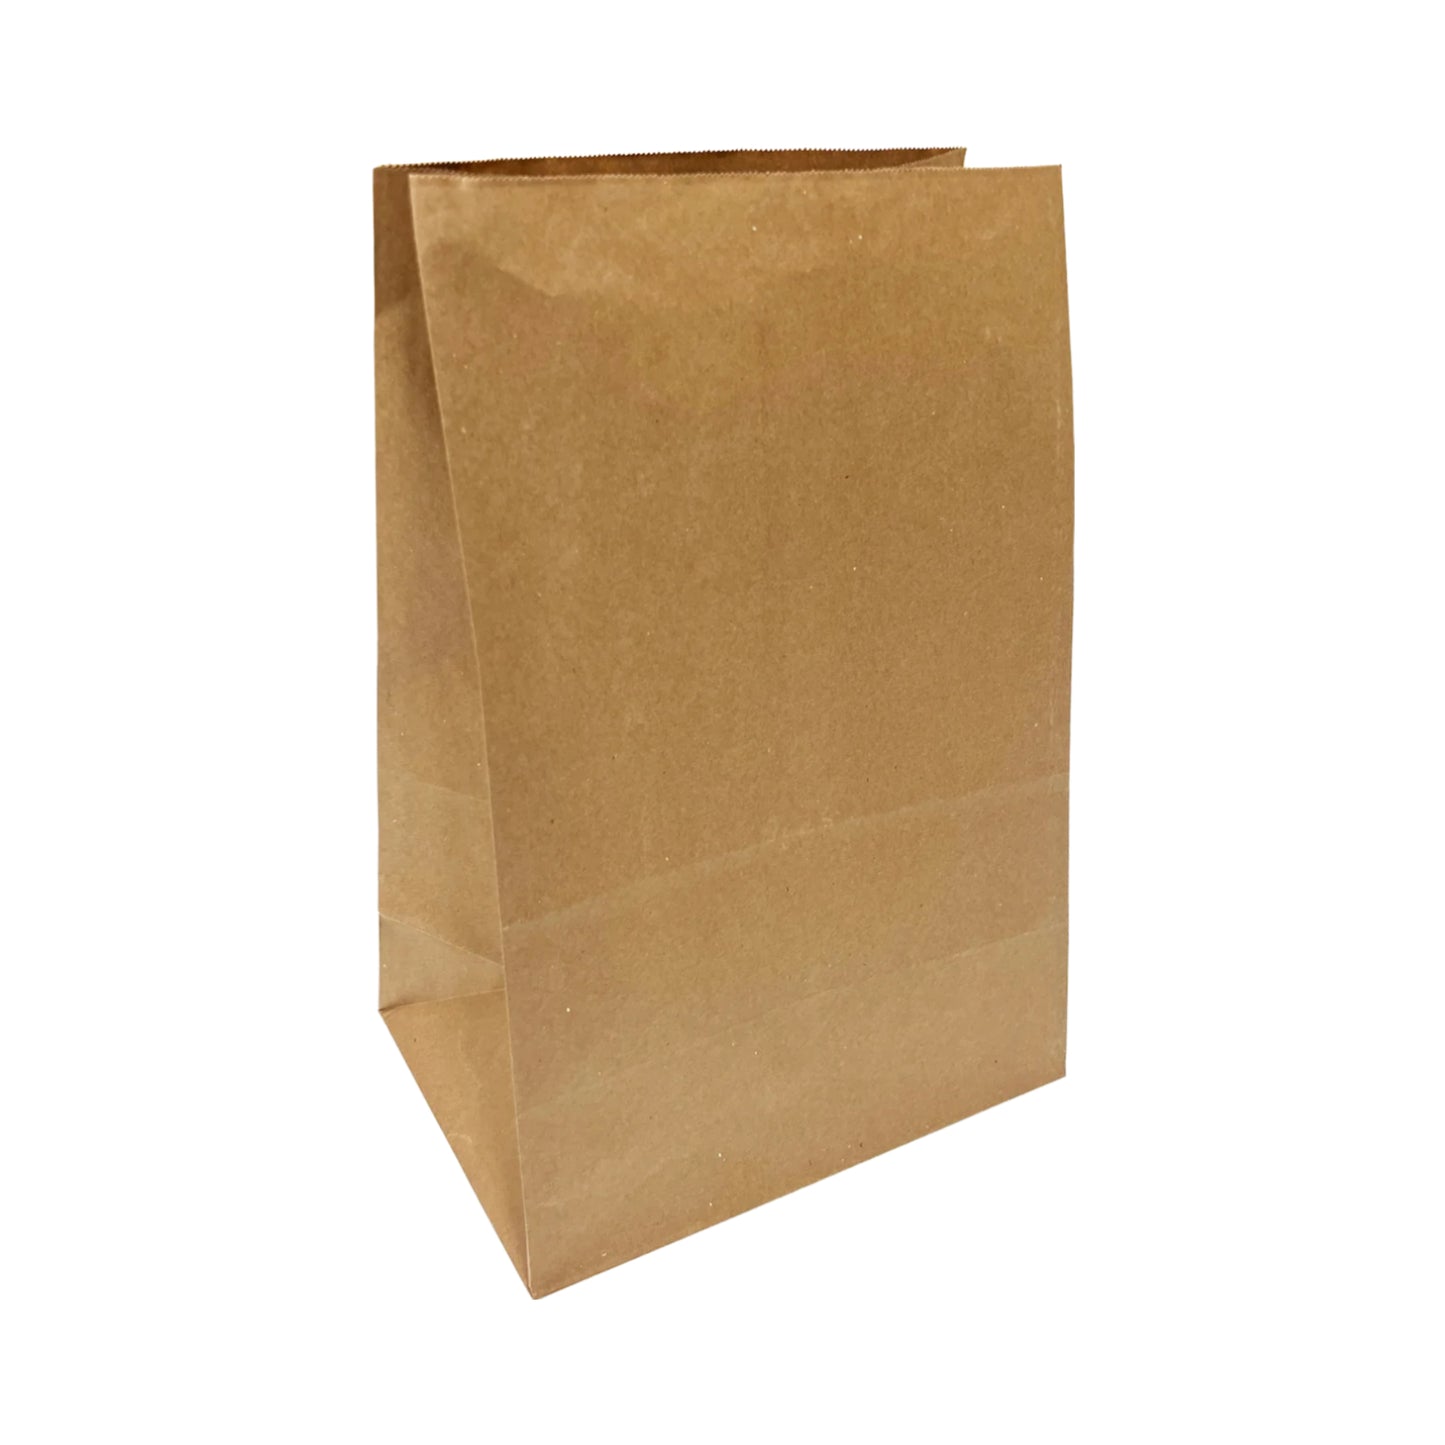 500pcs #3 Grocery Bags 4.5x3.75x9 inches; $0.03/pc